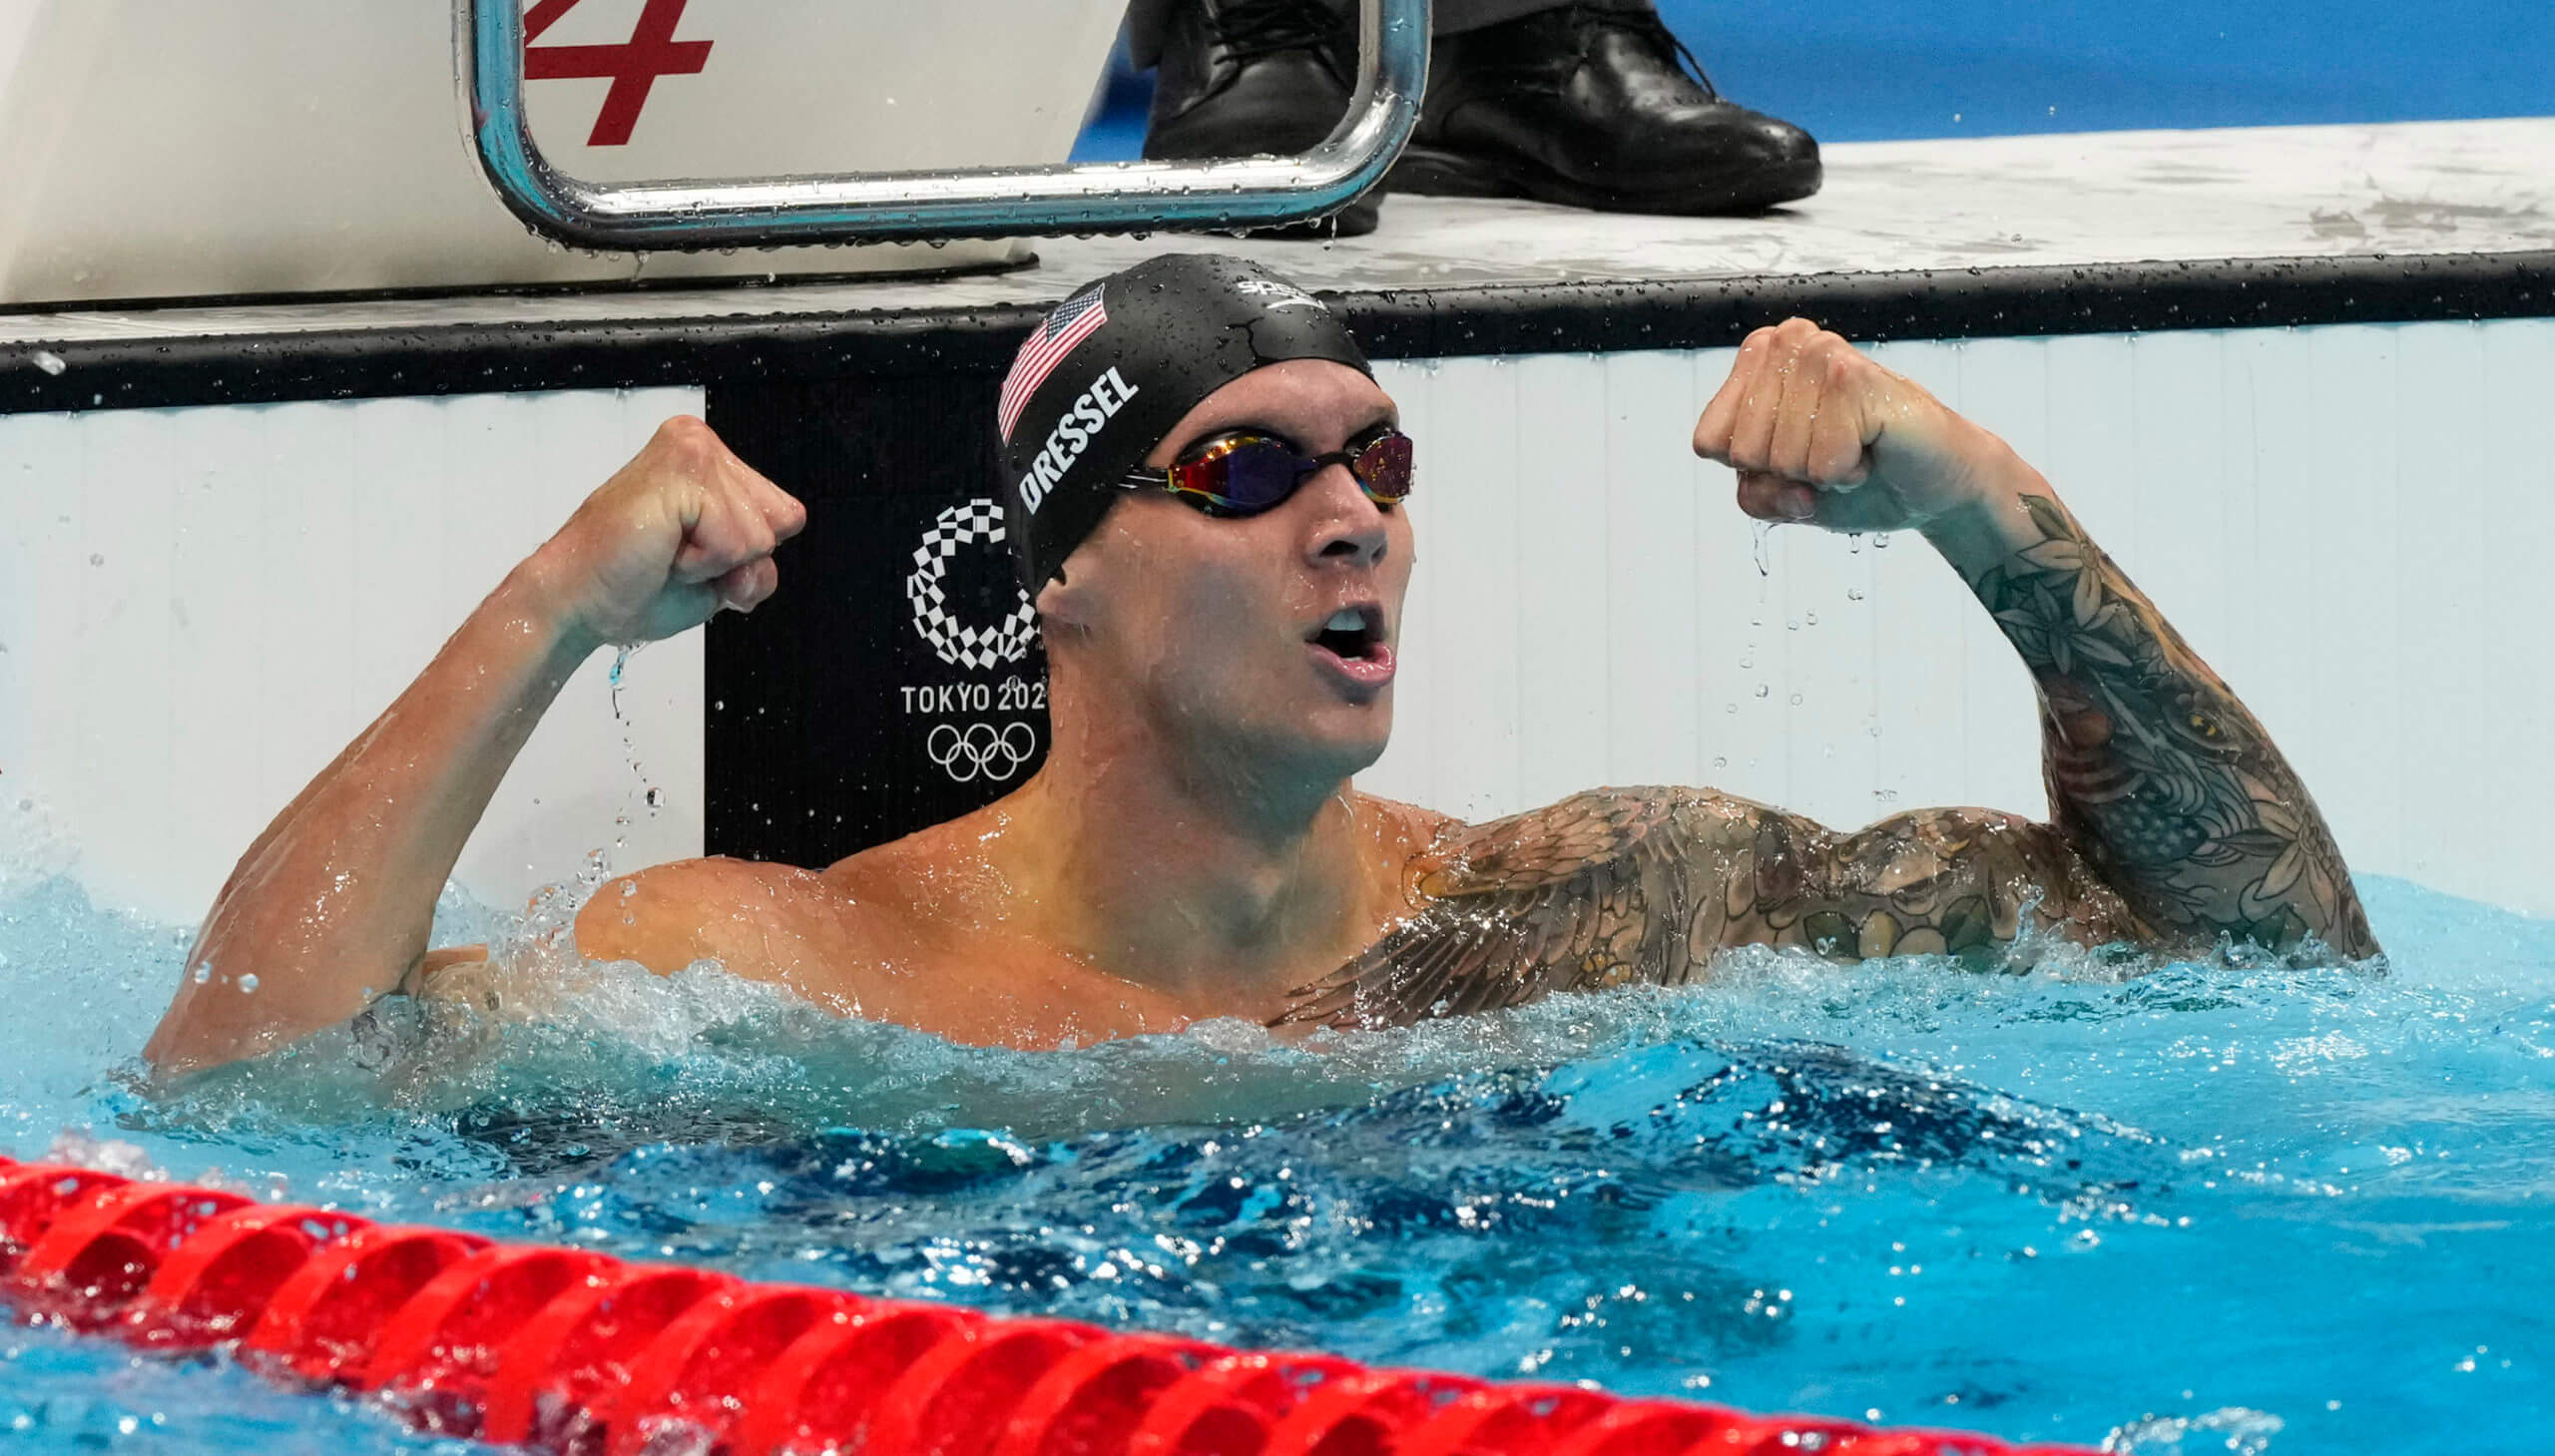 Post Olympics Rankings: Swimming World’s Top 25 Male Swimmers